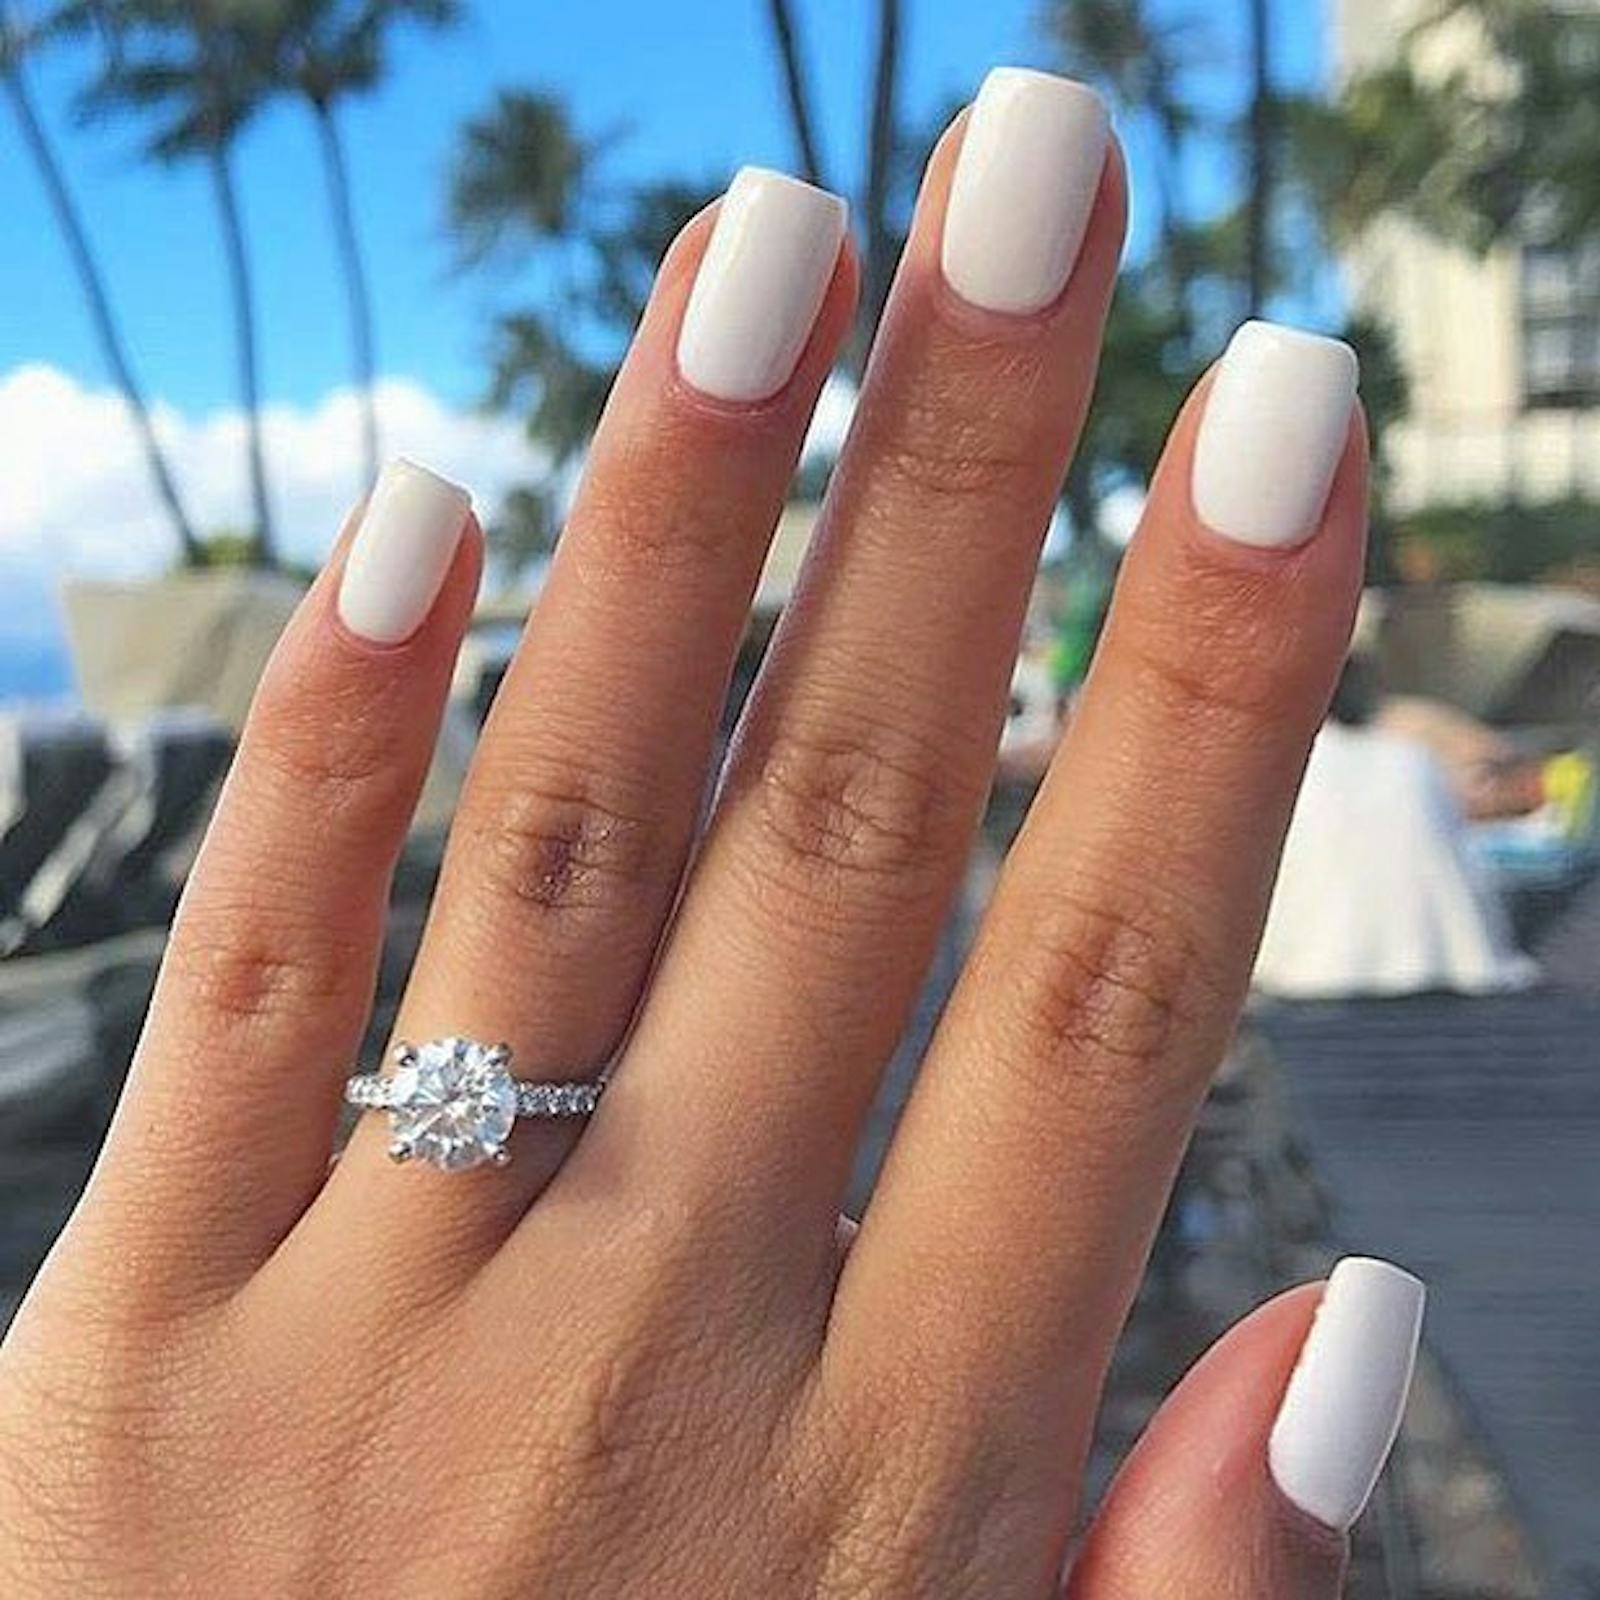 Fashion Girl Brides Are Loving This Out-Of-The-Box Nail Trend